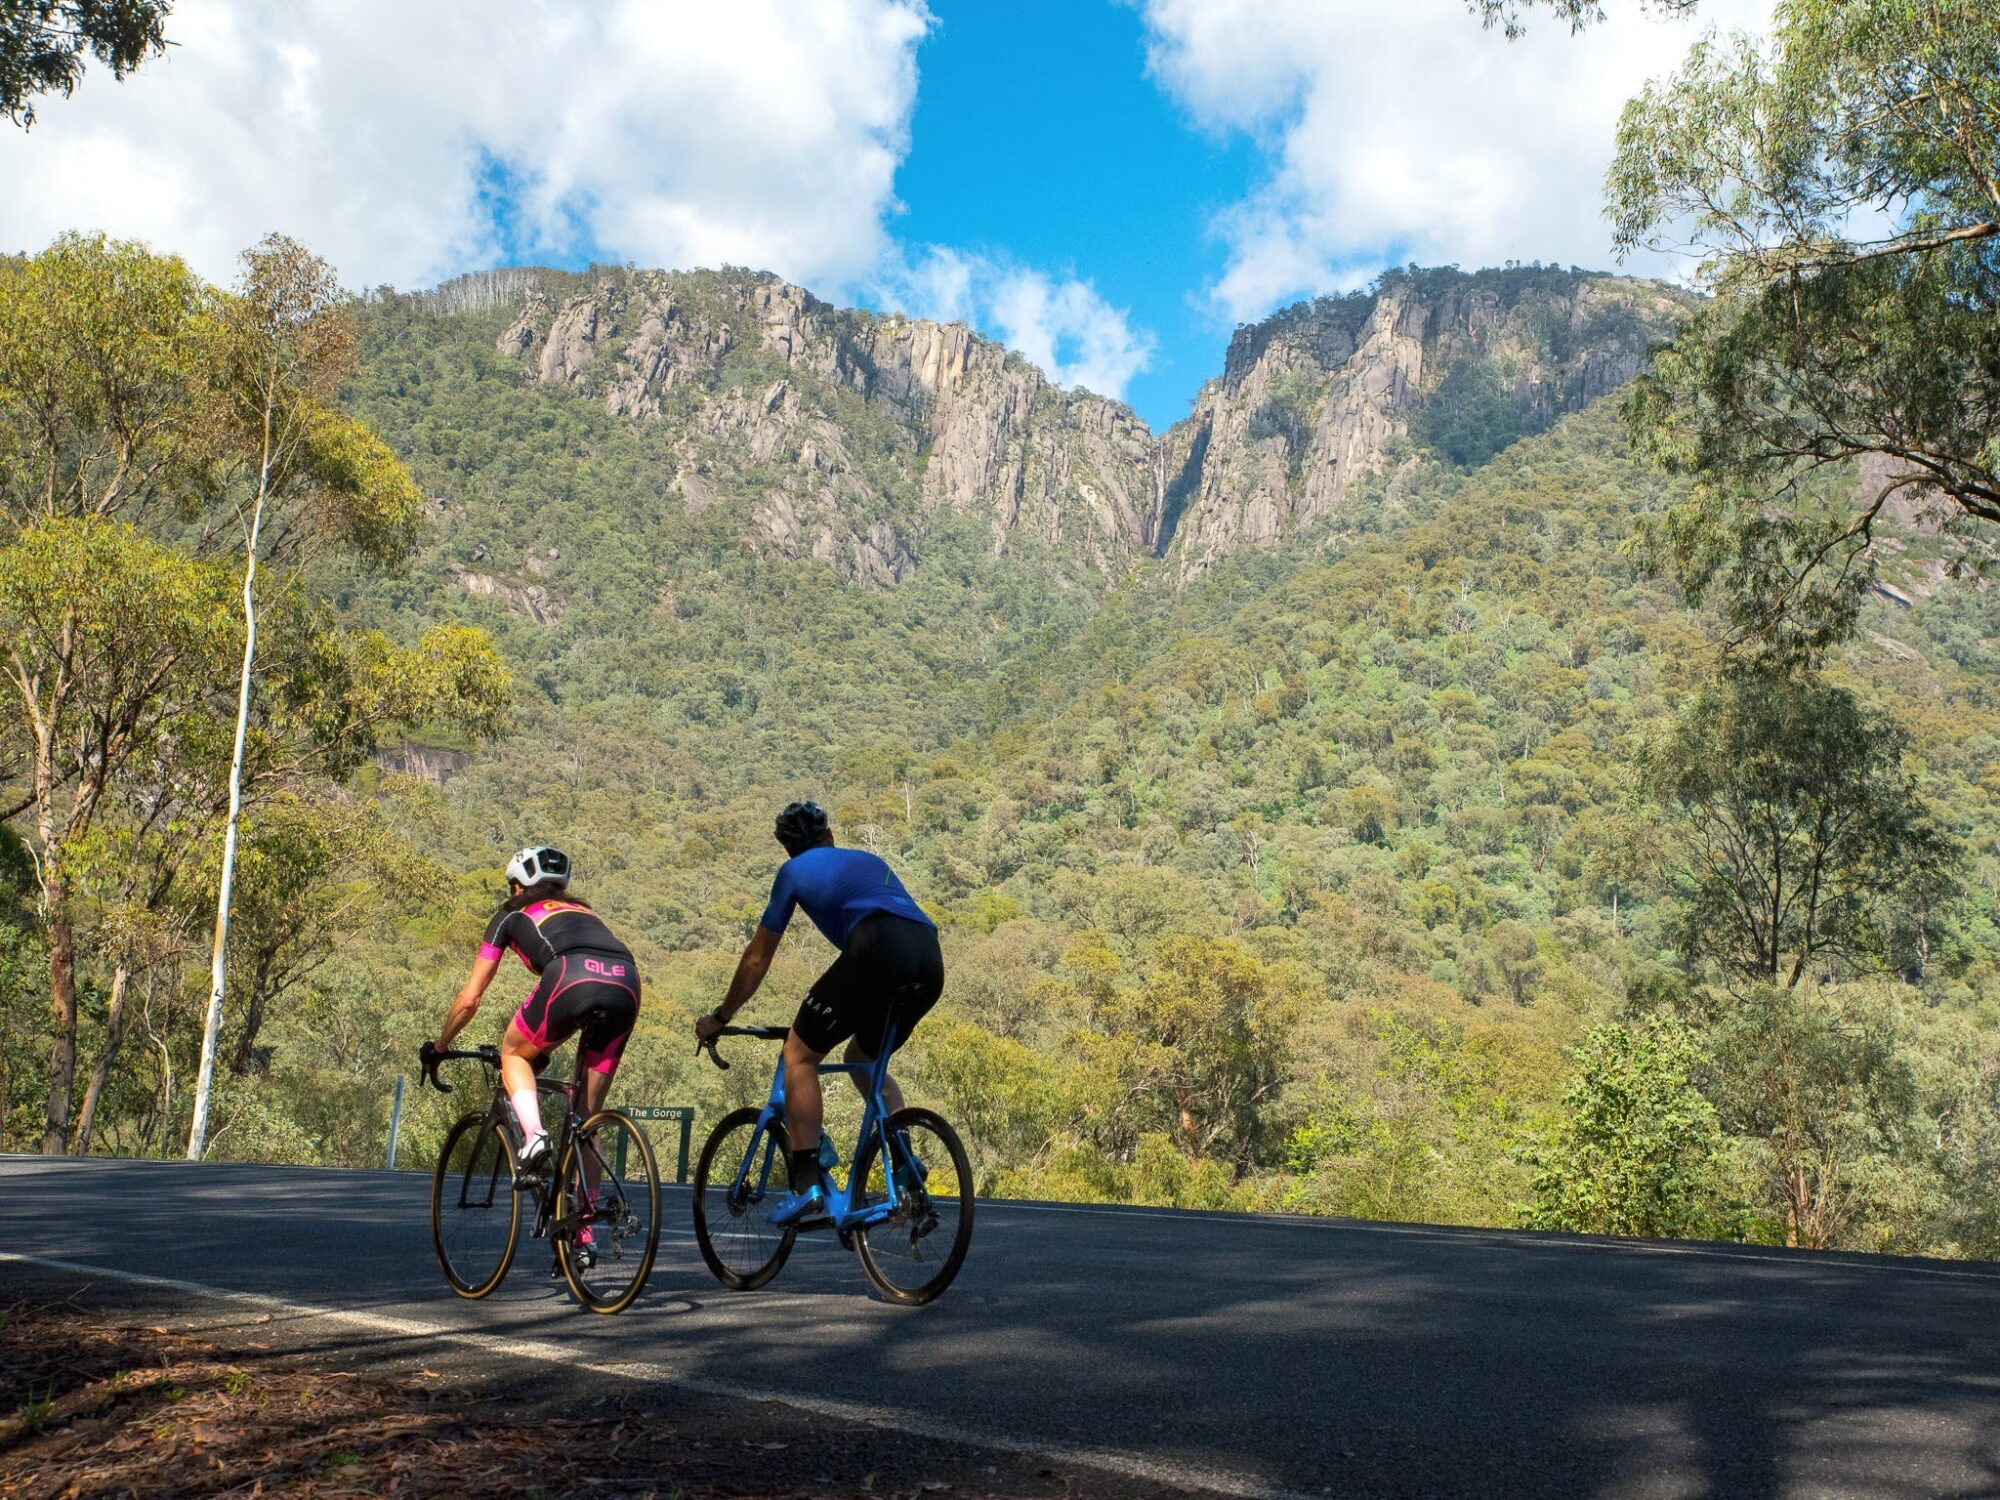 Two road cyclists starting the climb up Mount Buffalo, looking up at The Gorge